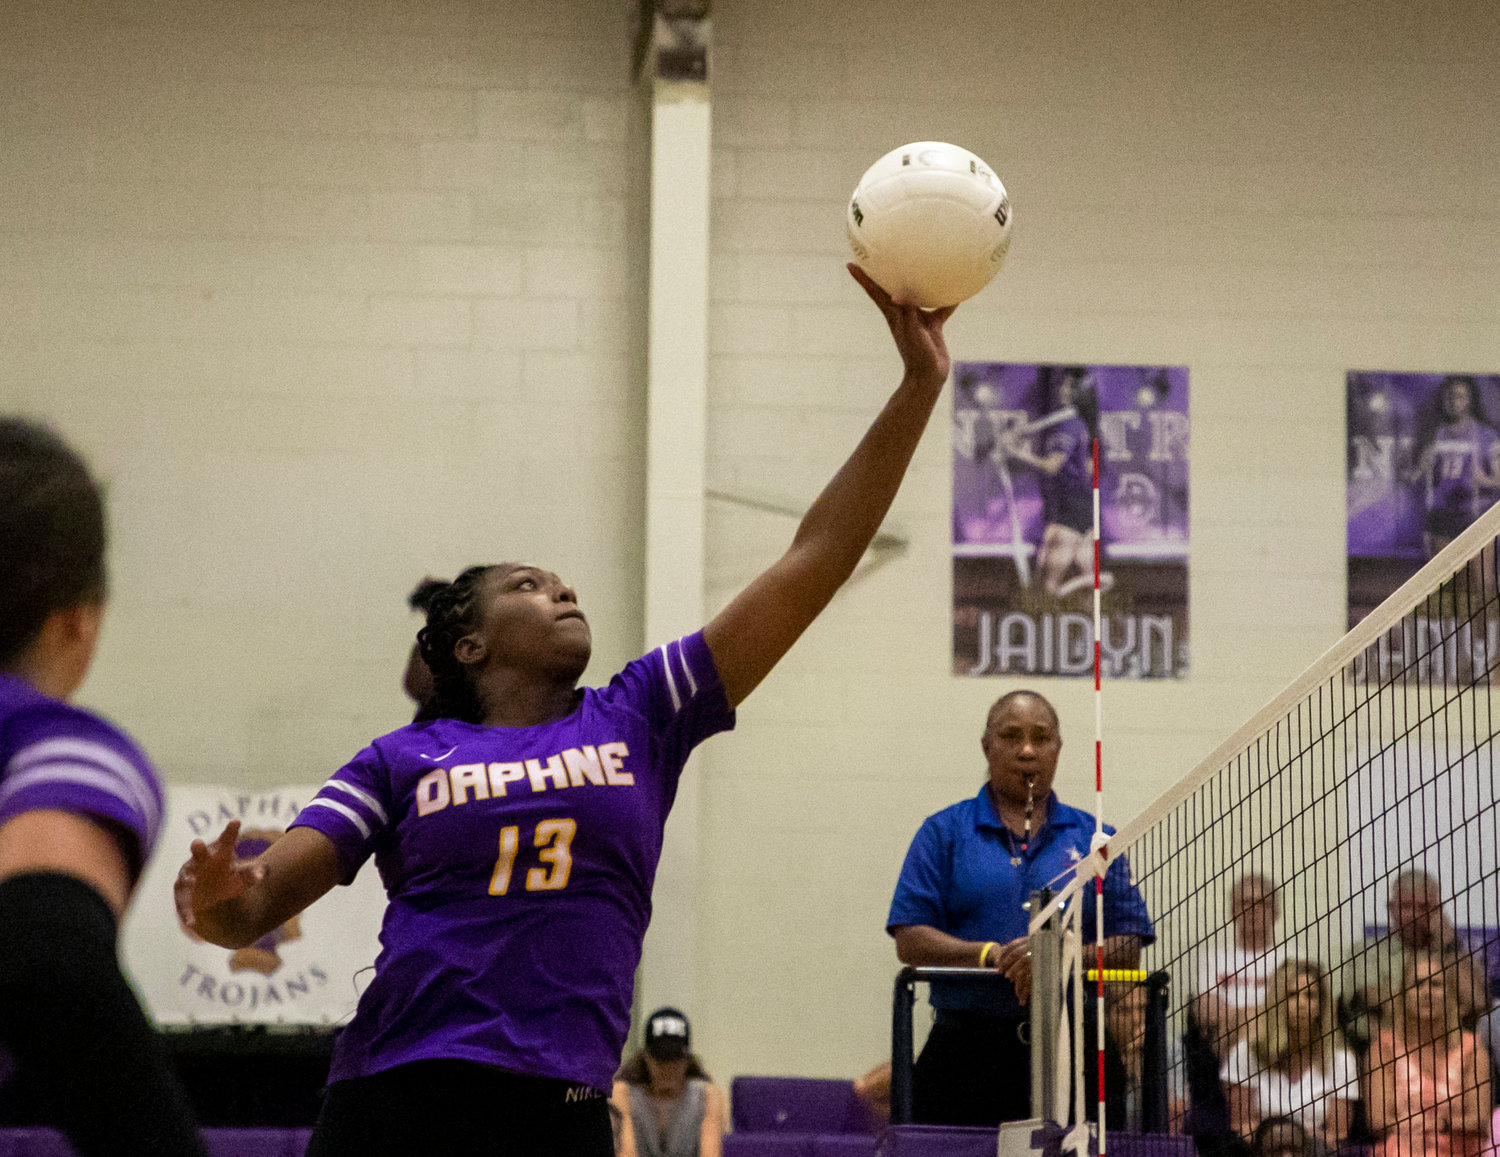 Daphne senior Janiyah King rises for a play at the net during the Trojans’ Class 7A Area 2 match against the McGill-Toolen Yellowjackets at Daphne High School Sept. 20, 2022. King was one of four all-county representatives for the Trojans, tied with Fairhope for the most on the squad.